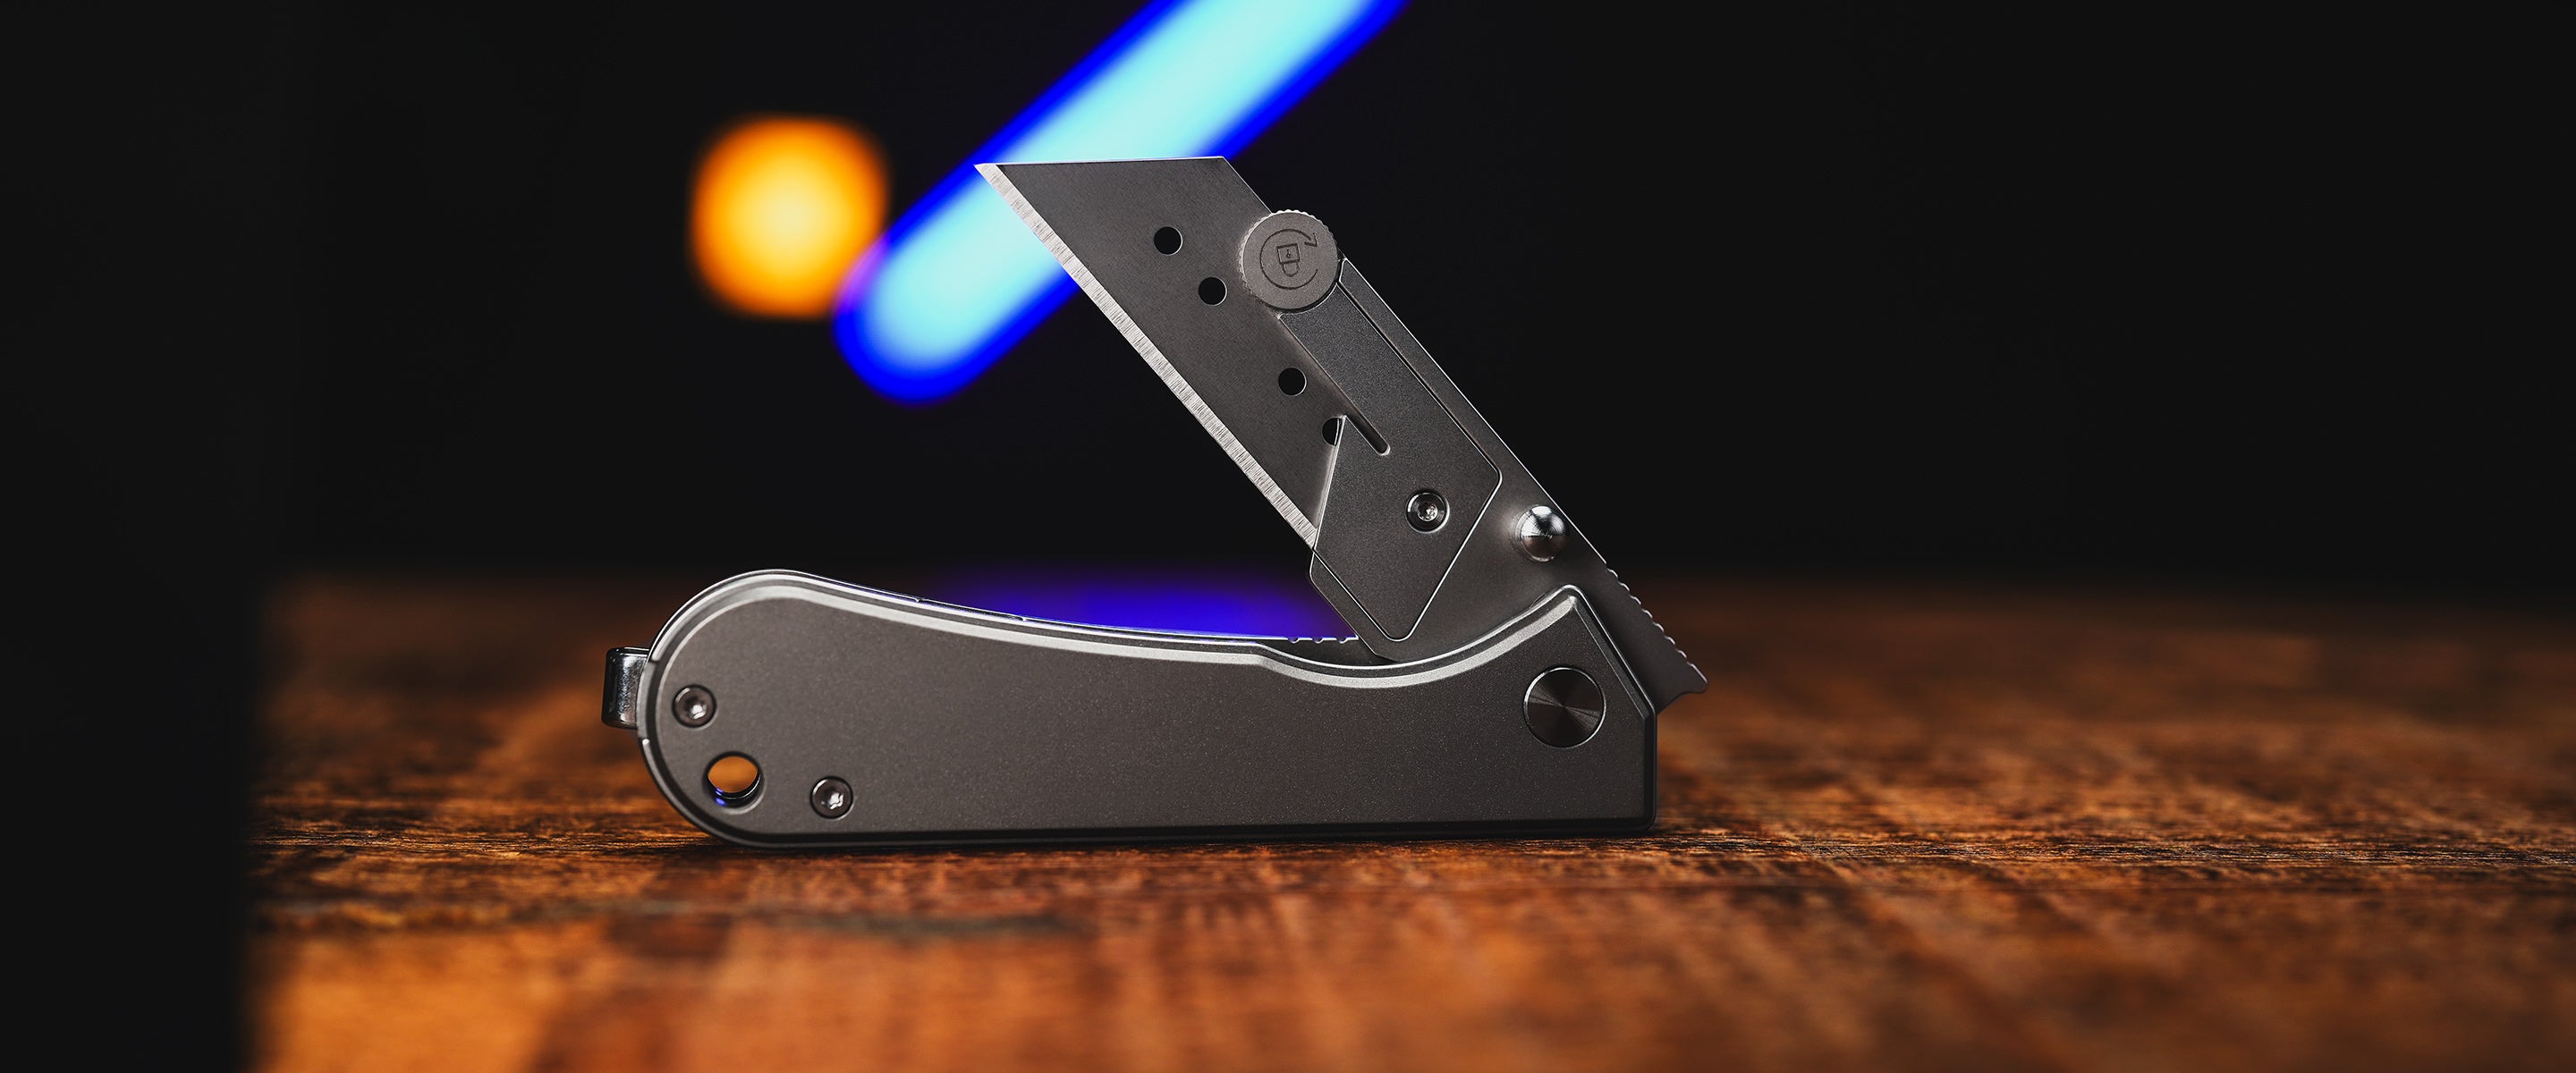 NUKNIVES - High quality EDC knives and Tools